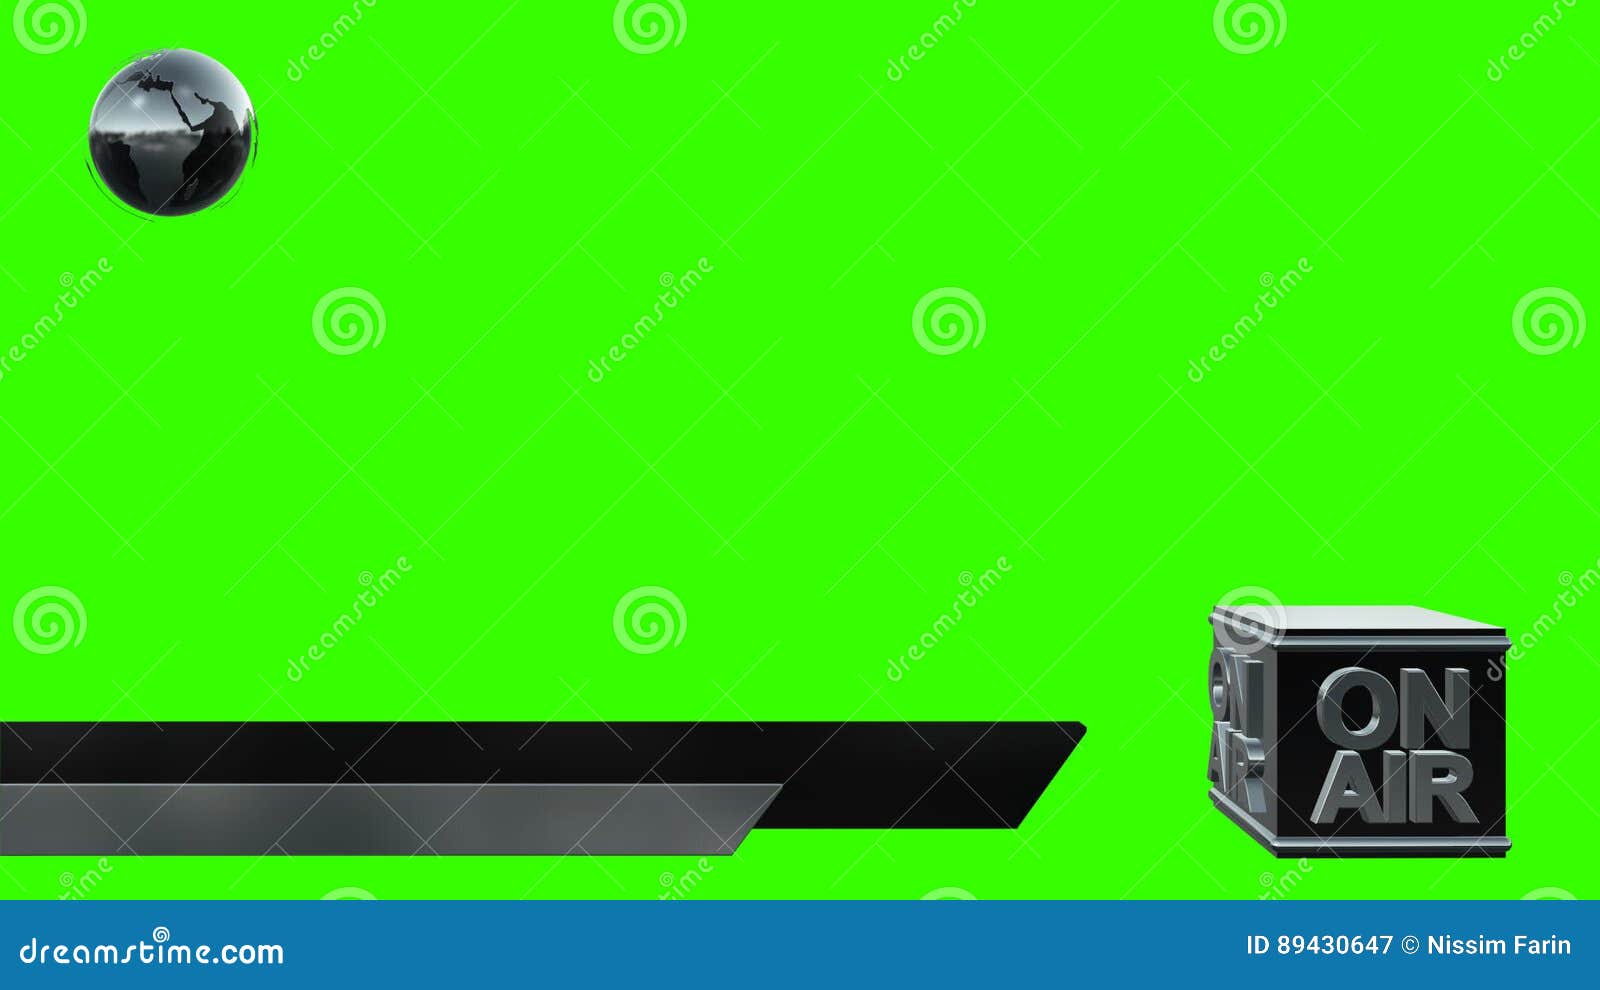 Breaking News Lower Third Elements Green Screen Background Stock Footage Videos 19 Stock Videos